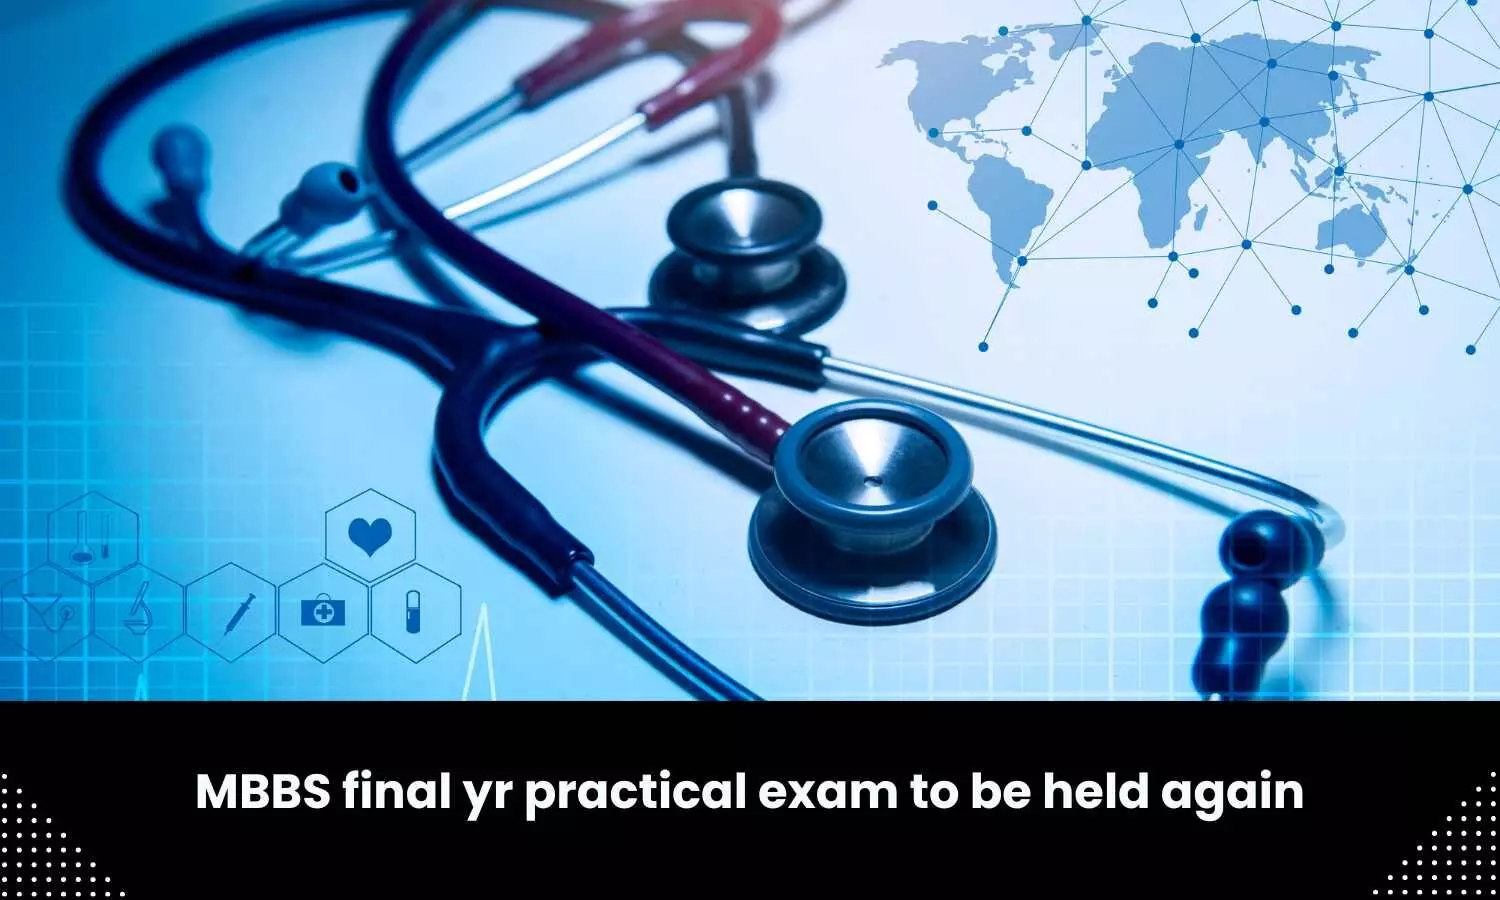 Final year practical exam for MBBS to be held again